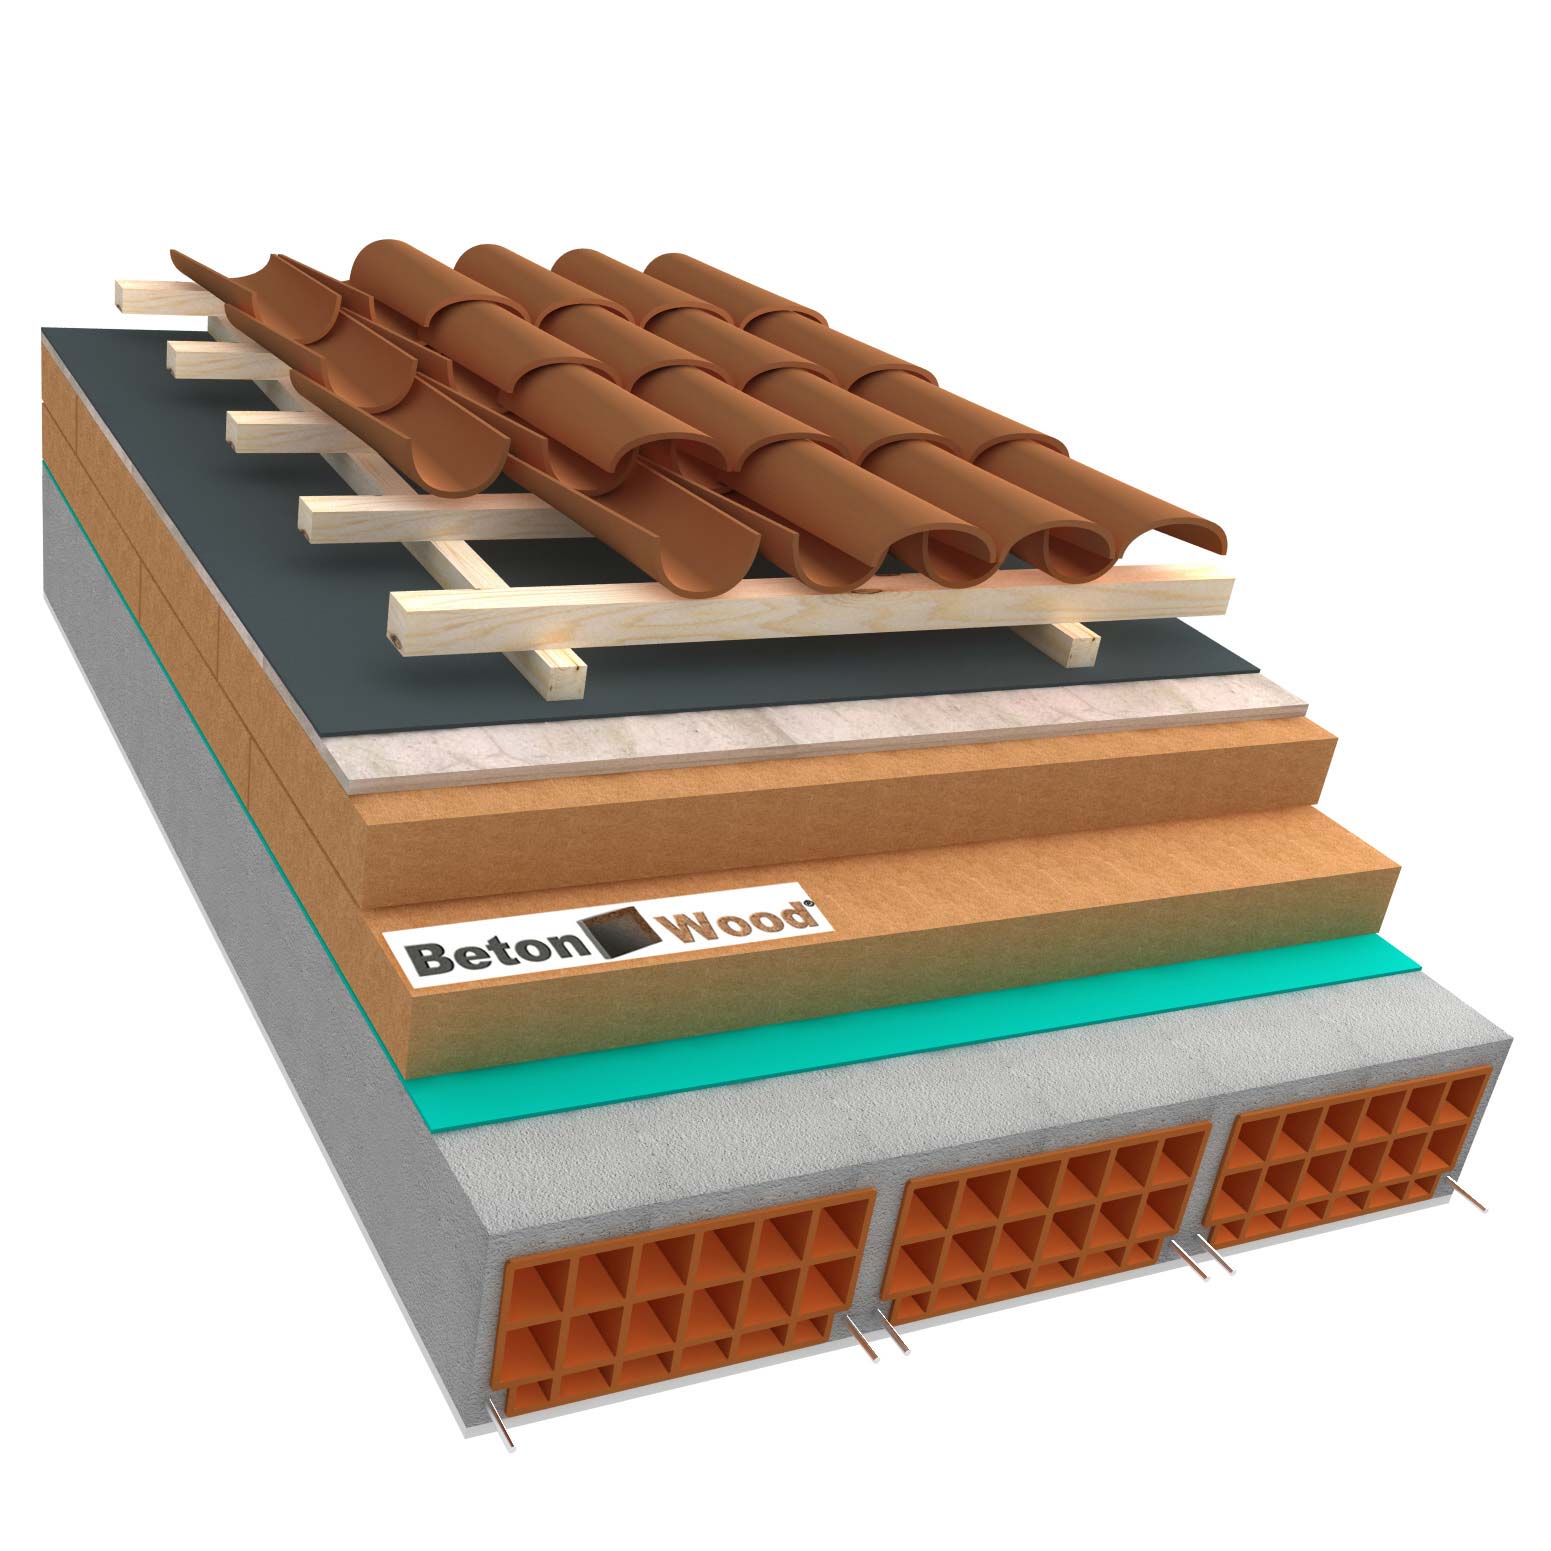 Ventilated roof with fiber wood Therm and cement bonded particle boards on concrete